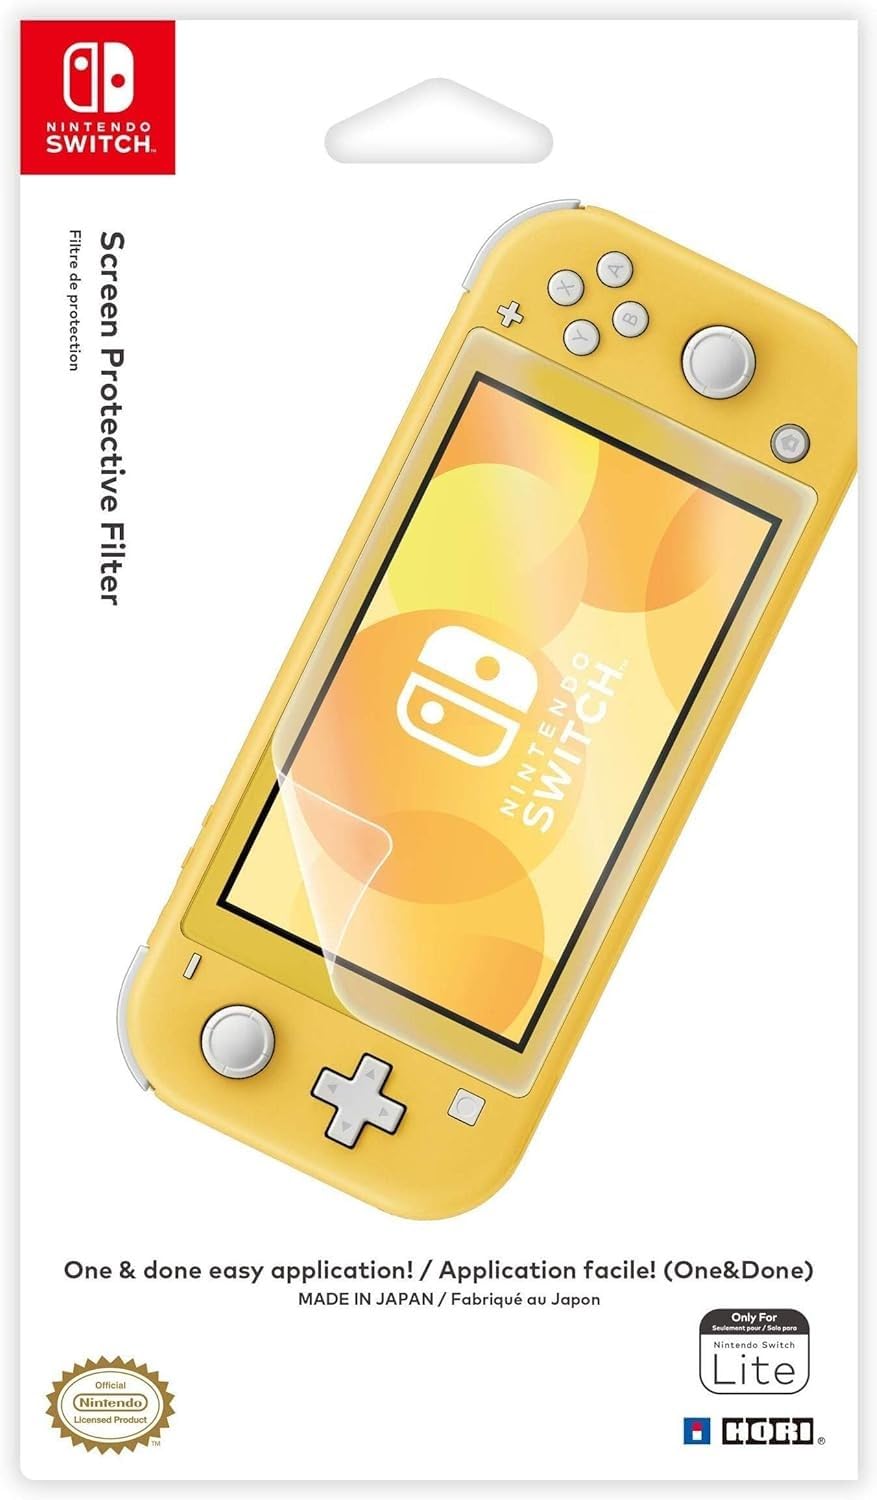 HORI Nintendo Switch Lite Screen Protector  $4.99 + Free Shipping w/ Prime or on $35+